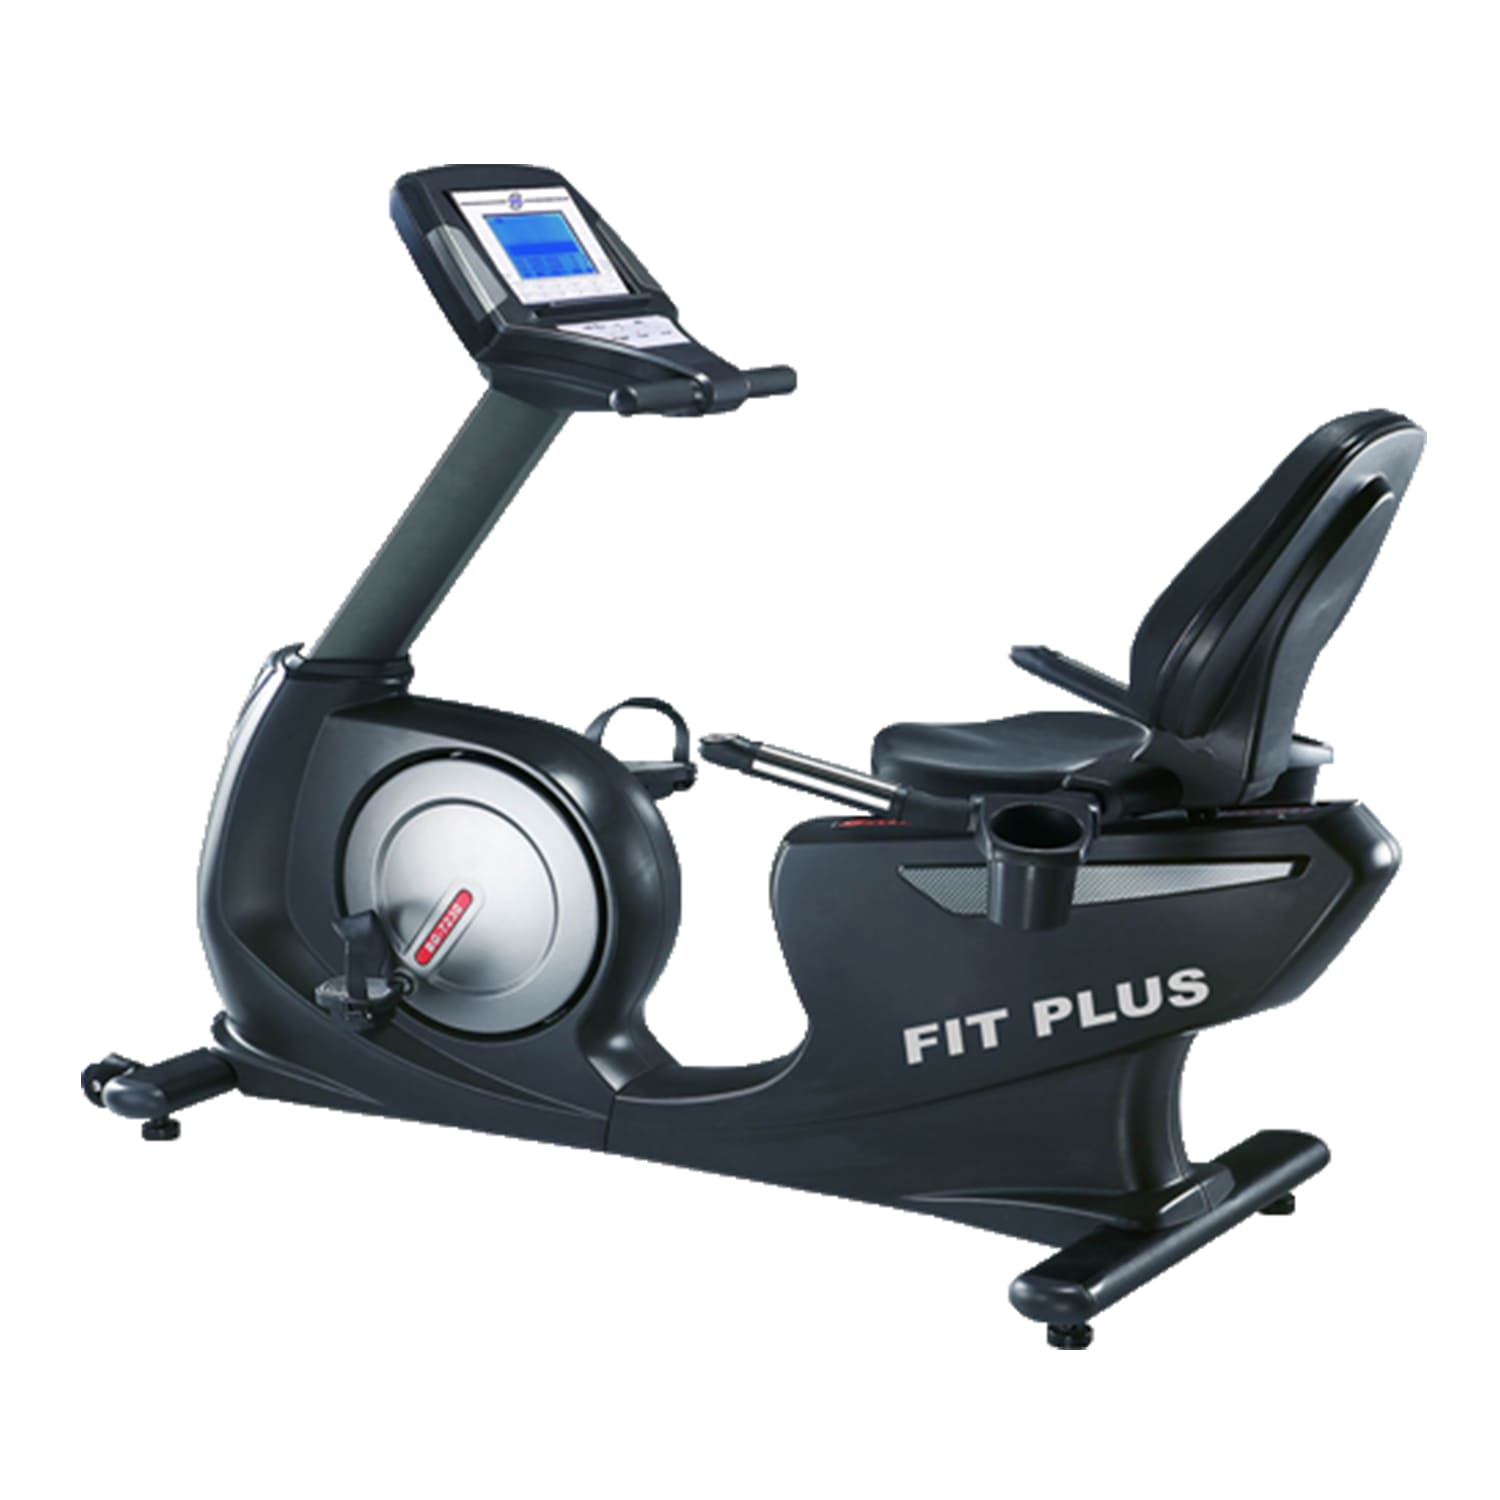 FIT PLUS Fit Plus Recumbent Bike, Commercial and Heavy Duty Model